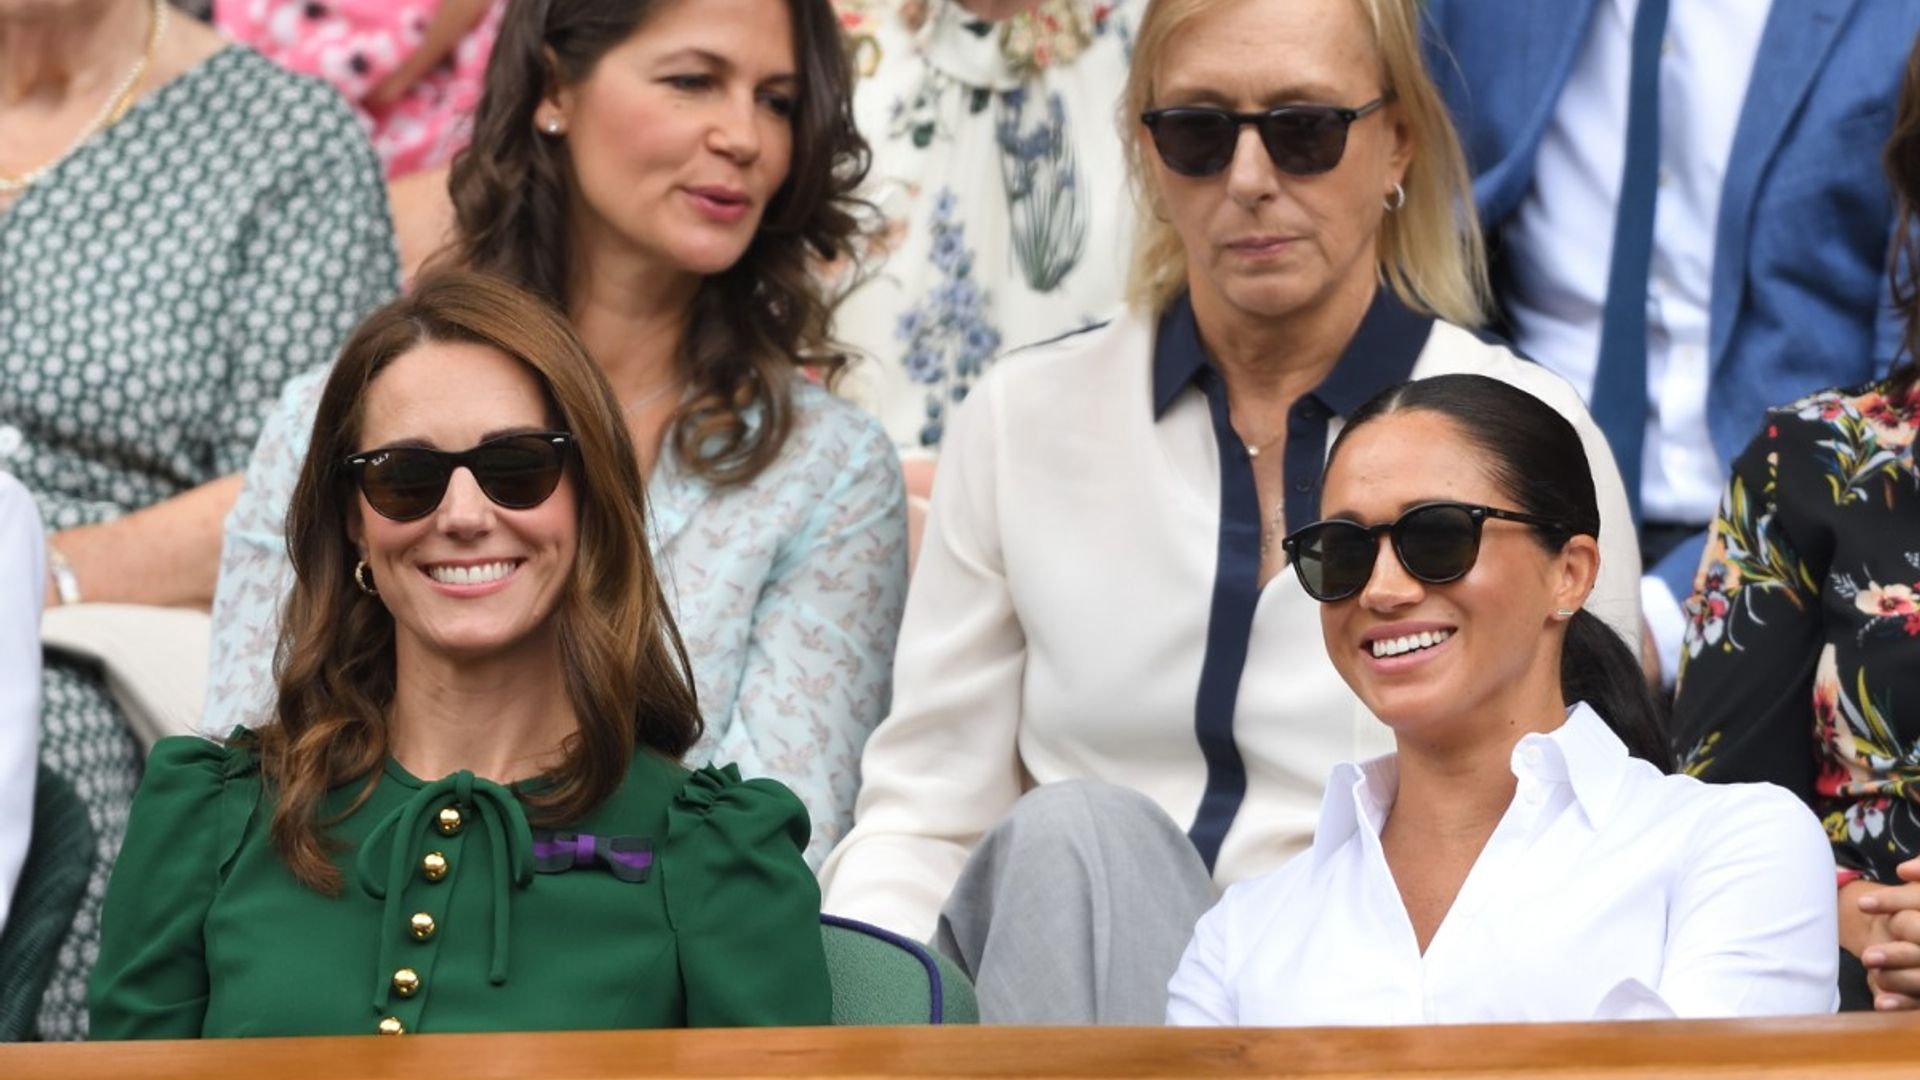 Find out what made Kate Middleton and Meghan Markle LAUGH so much at Wimbledon